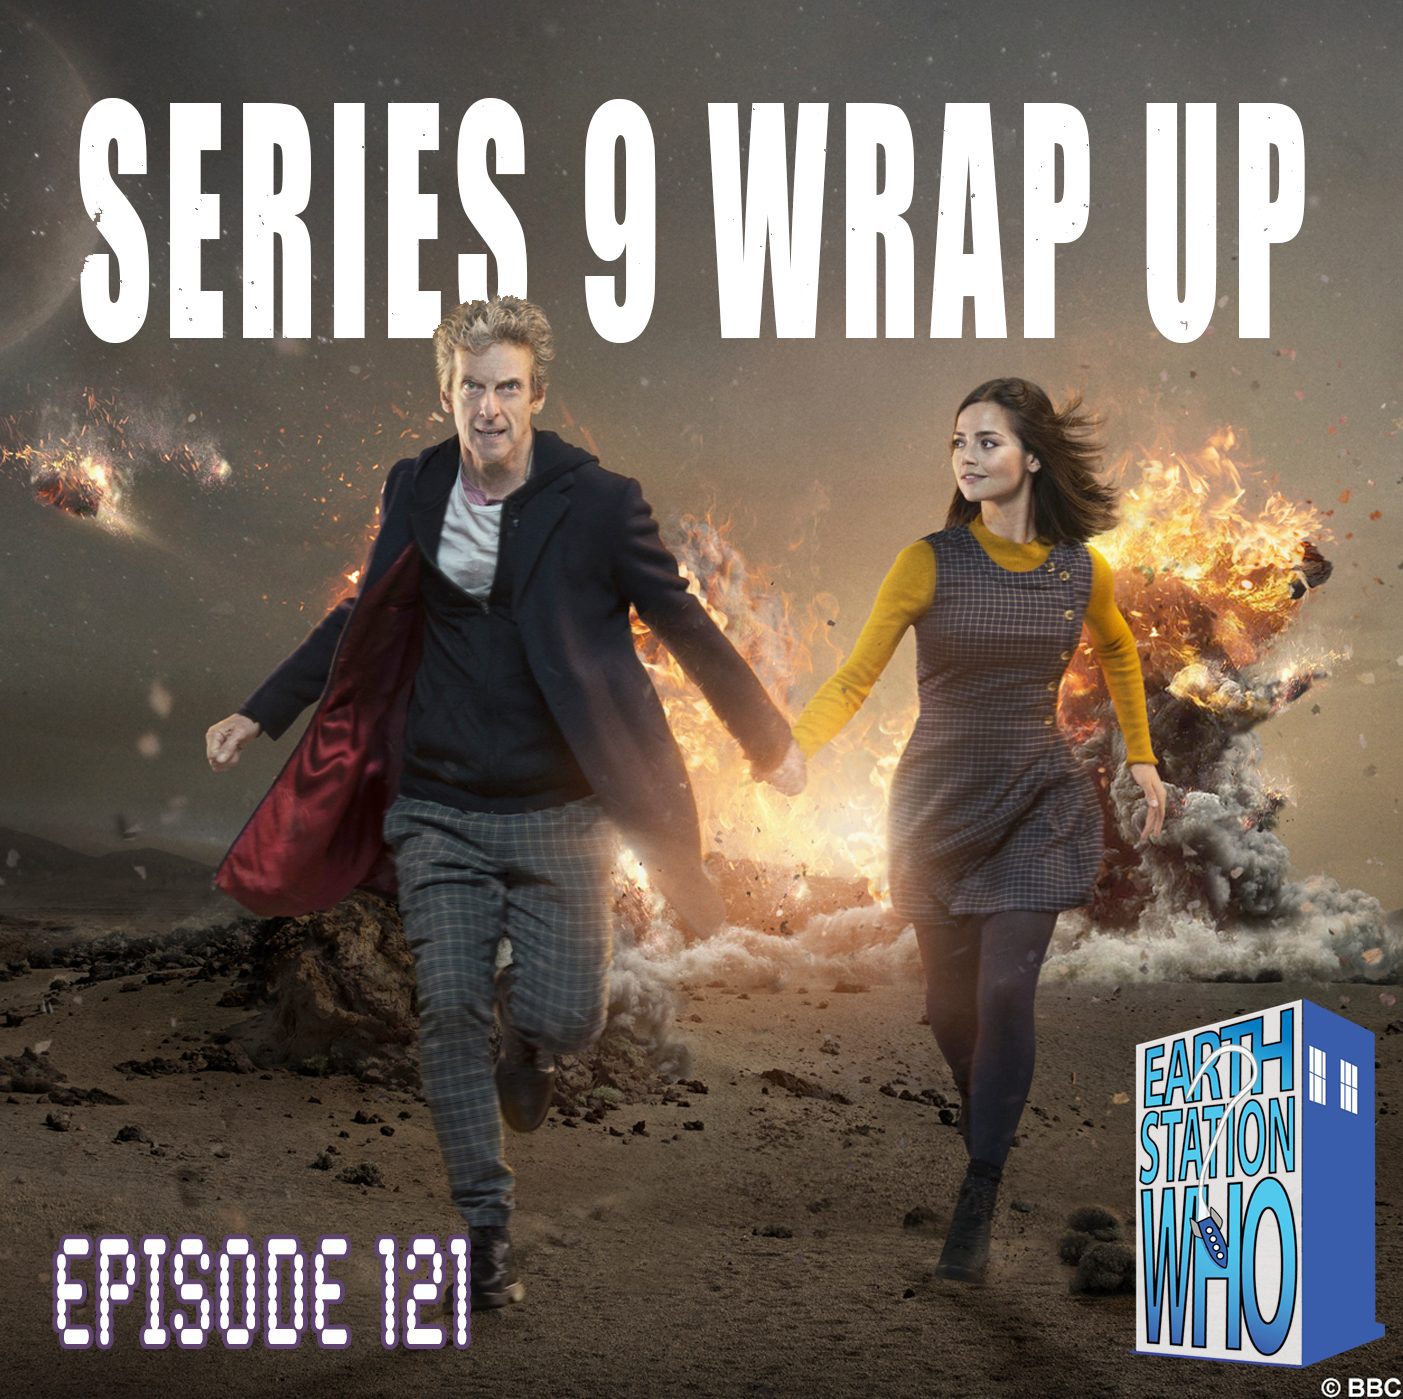 Earth Station Who 121 - Series 9 Wrap Up